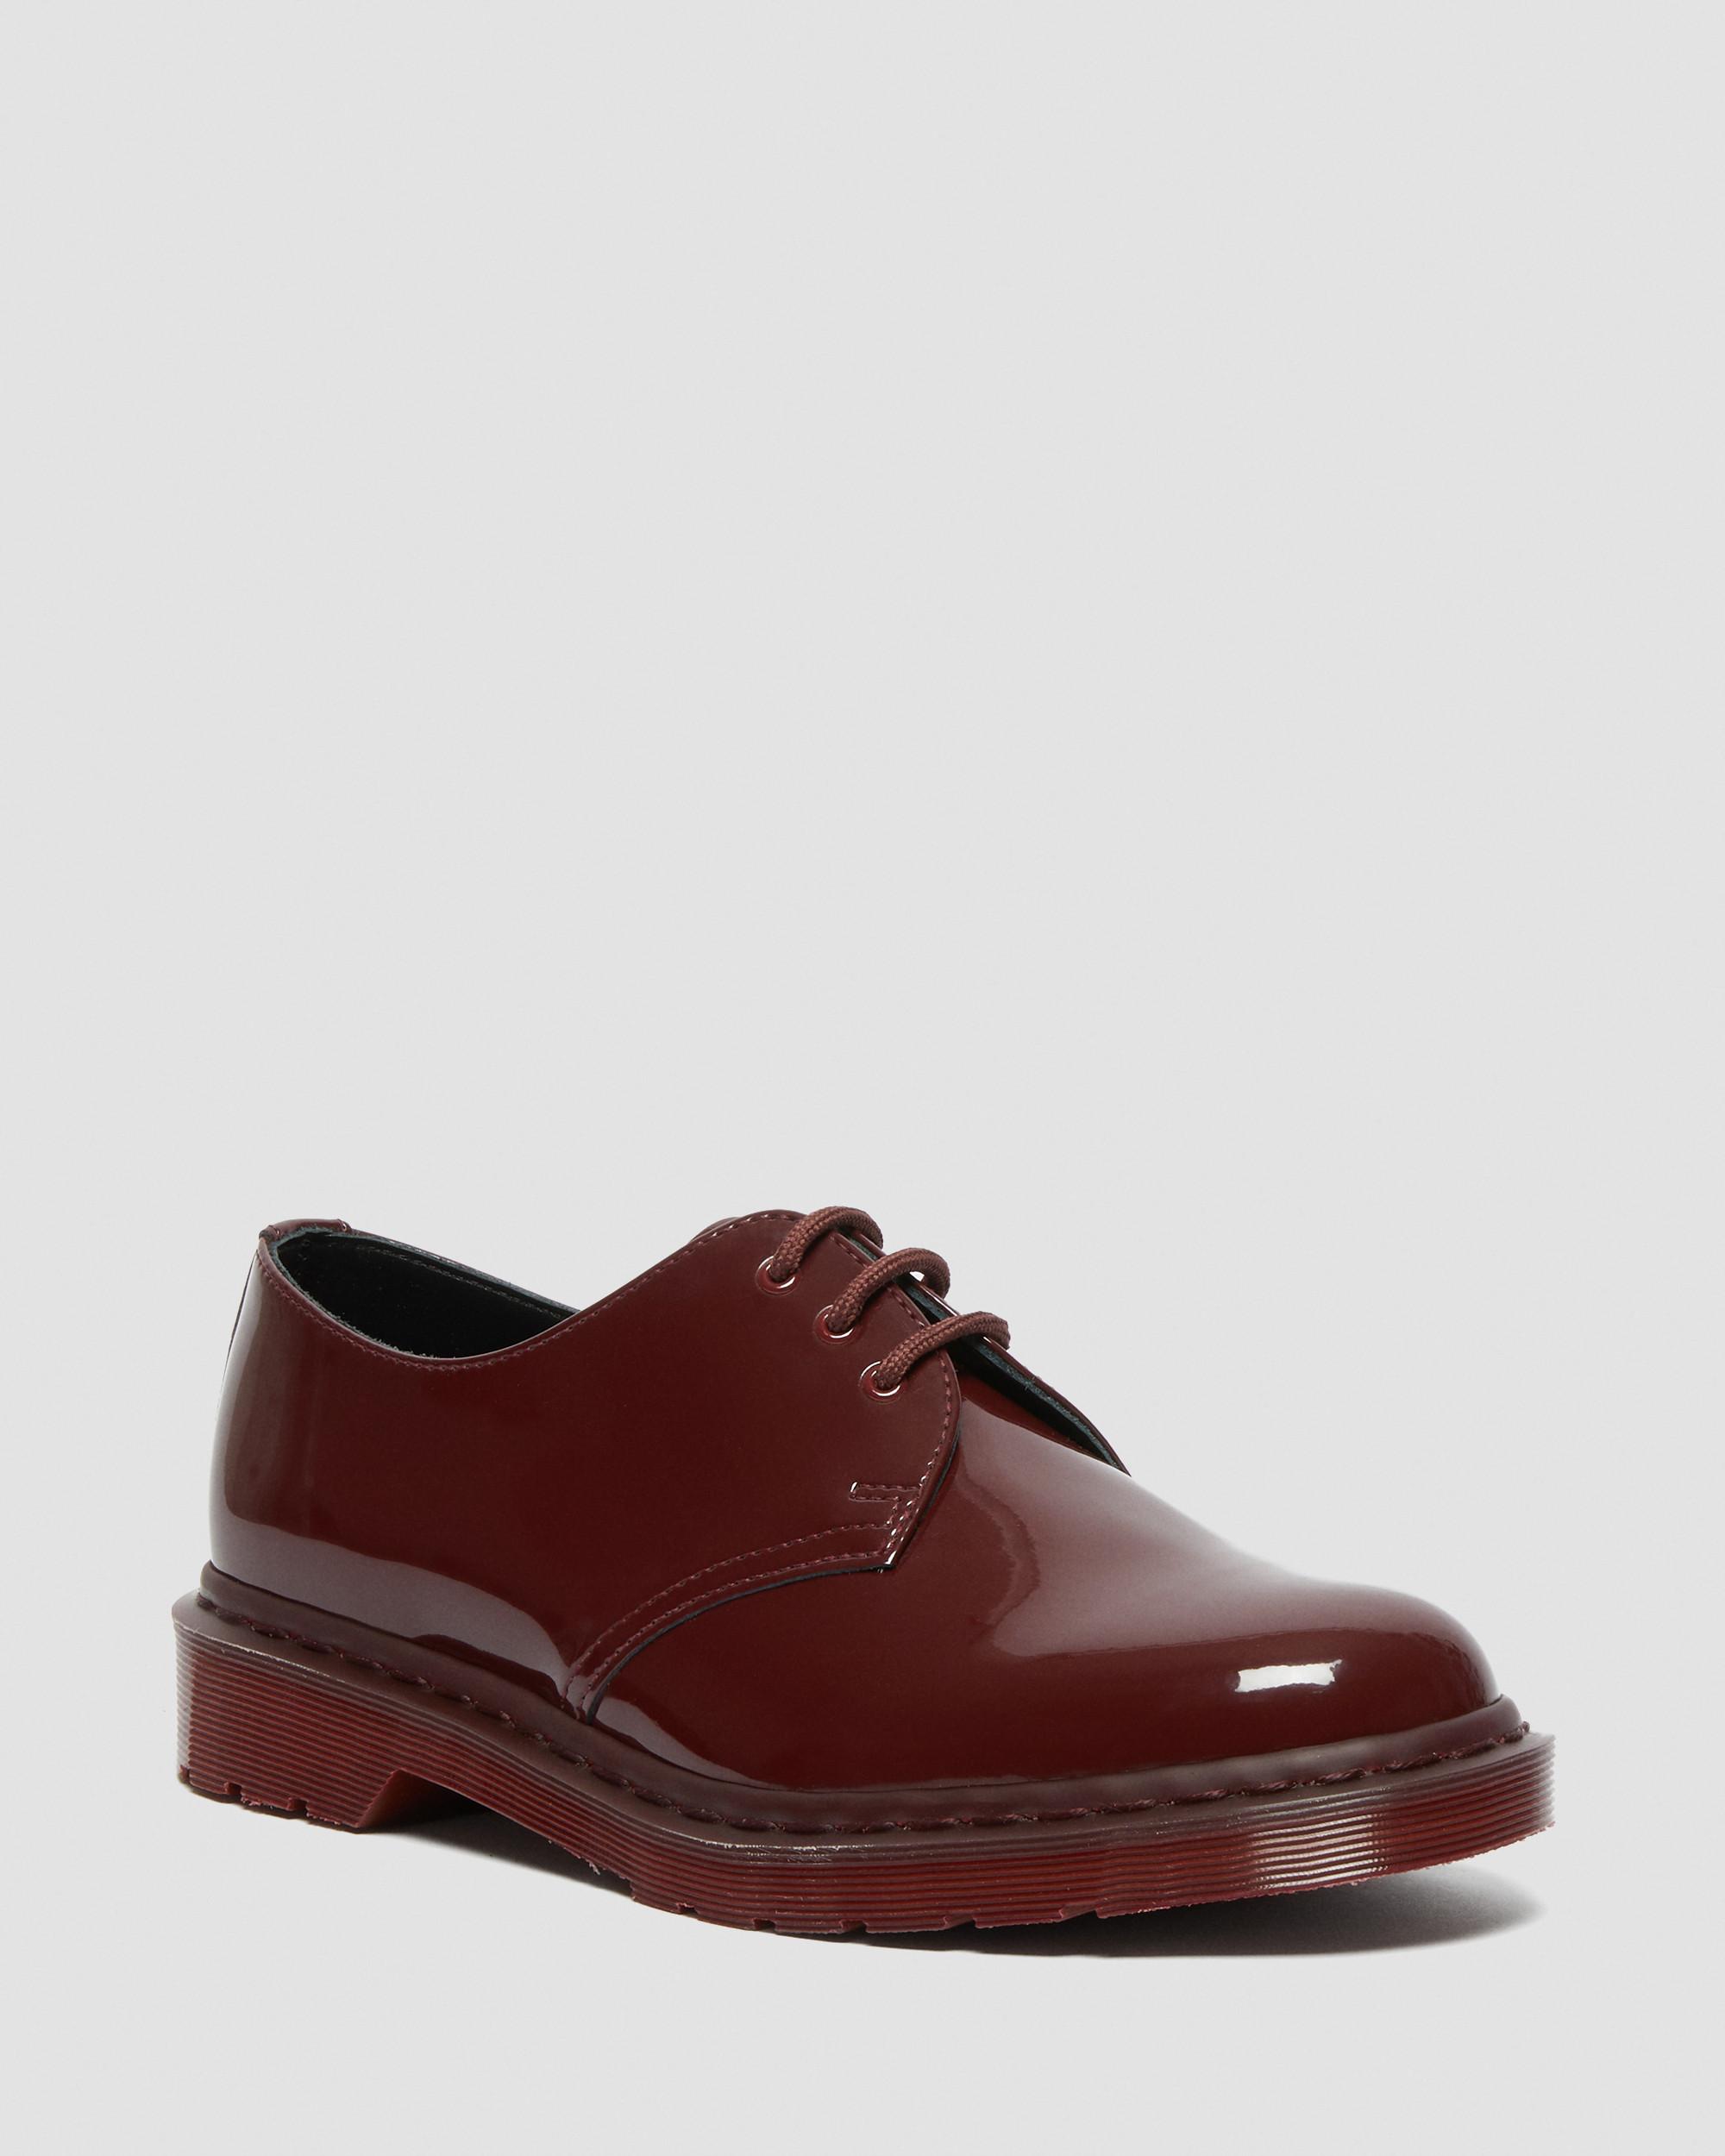 1461 Mono Patent Leather Oxford Shoes1461 Made in England Mono Patent Leather Oxford Shoes Dr. Martens